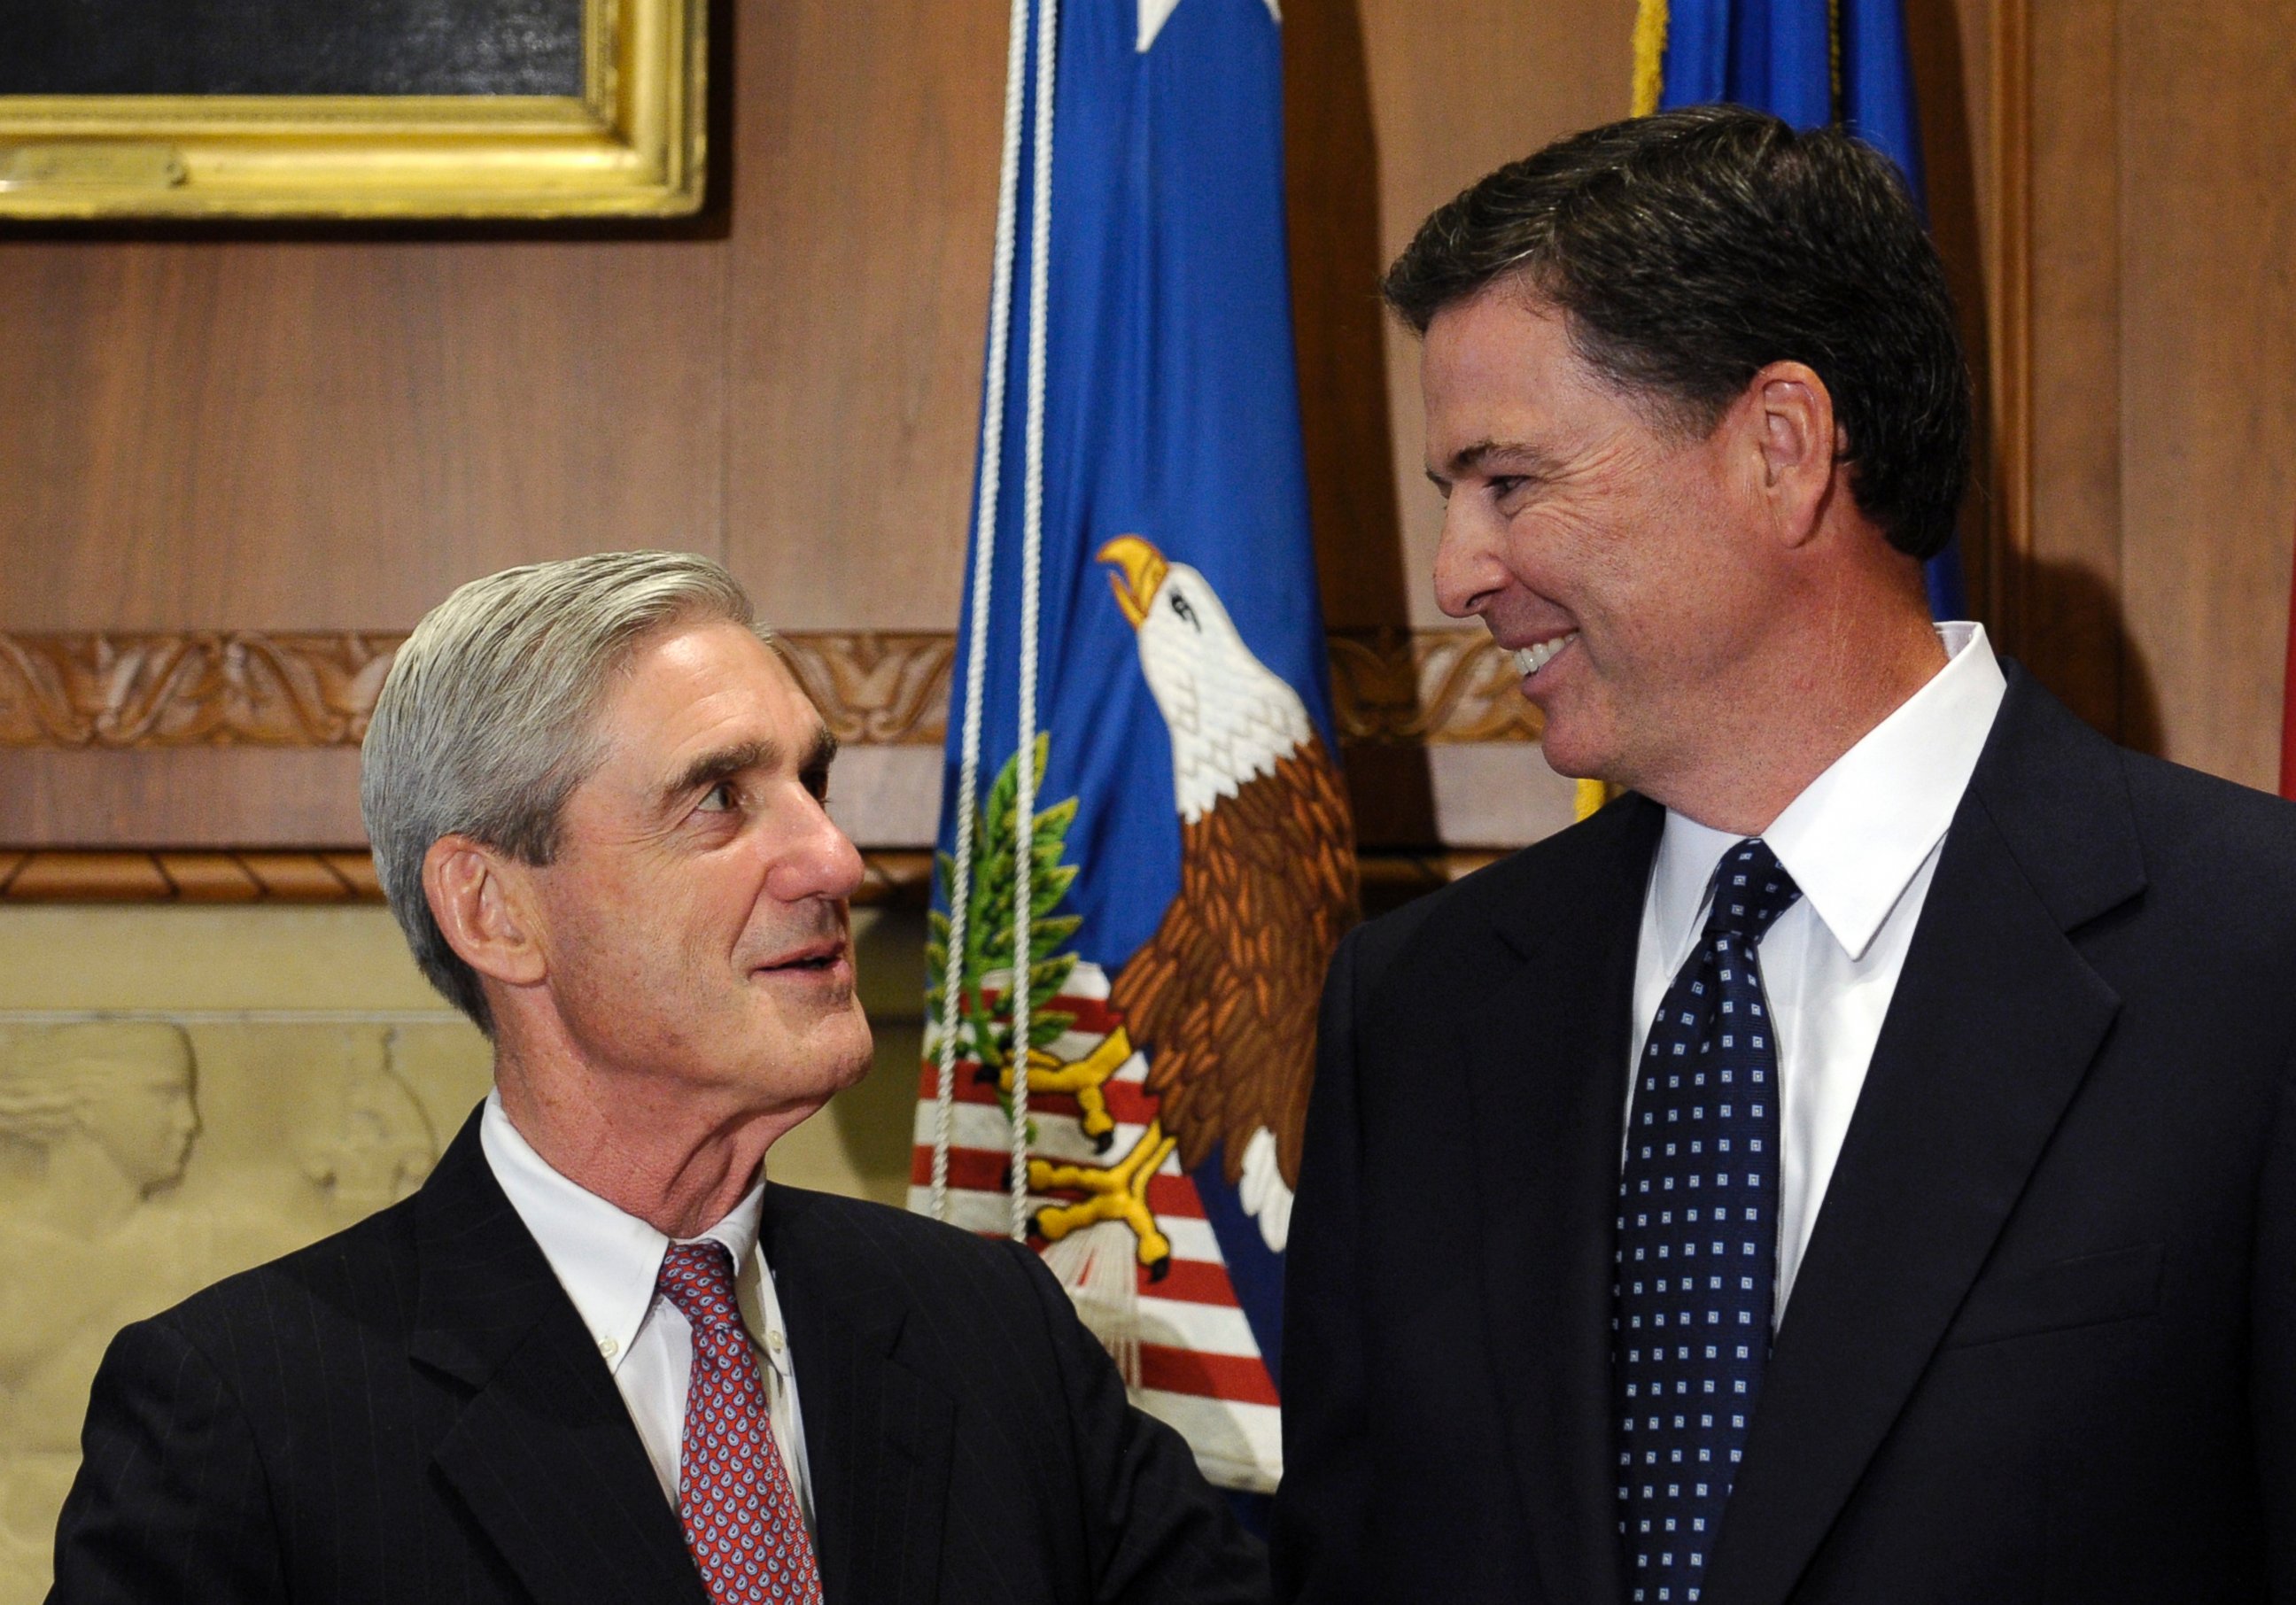 PHOTO: A Sept.4, 2013 file photo showing incoming FBI Director James Comey, right, talking with retiring FBI Director Robert Mueller at the Justice Department in Washington,D.C.  